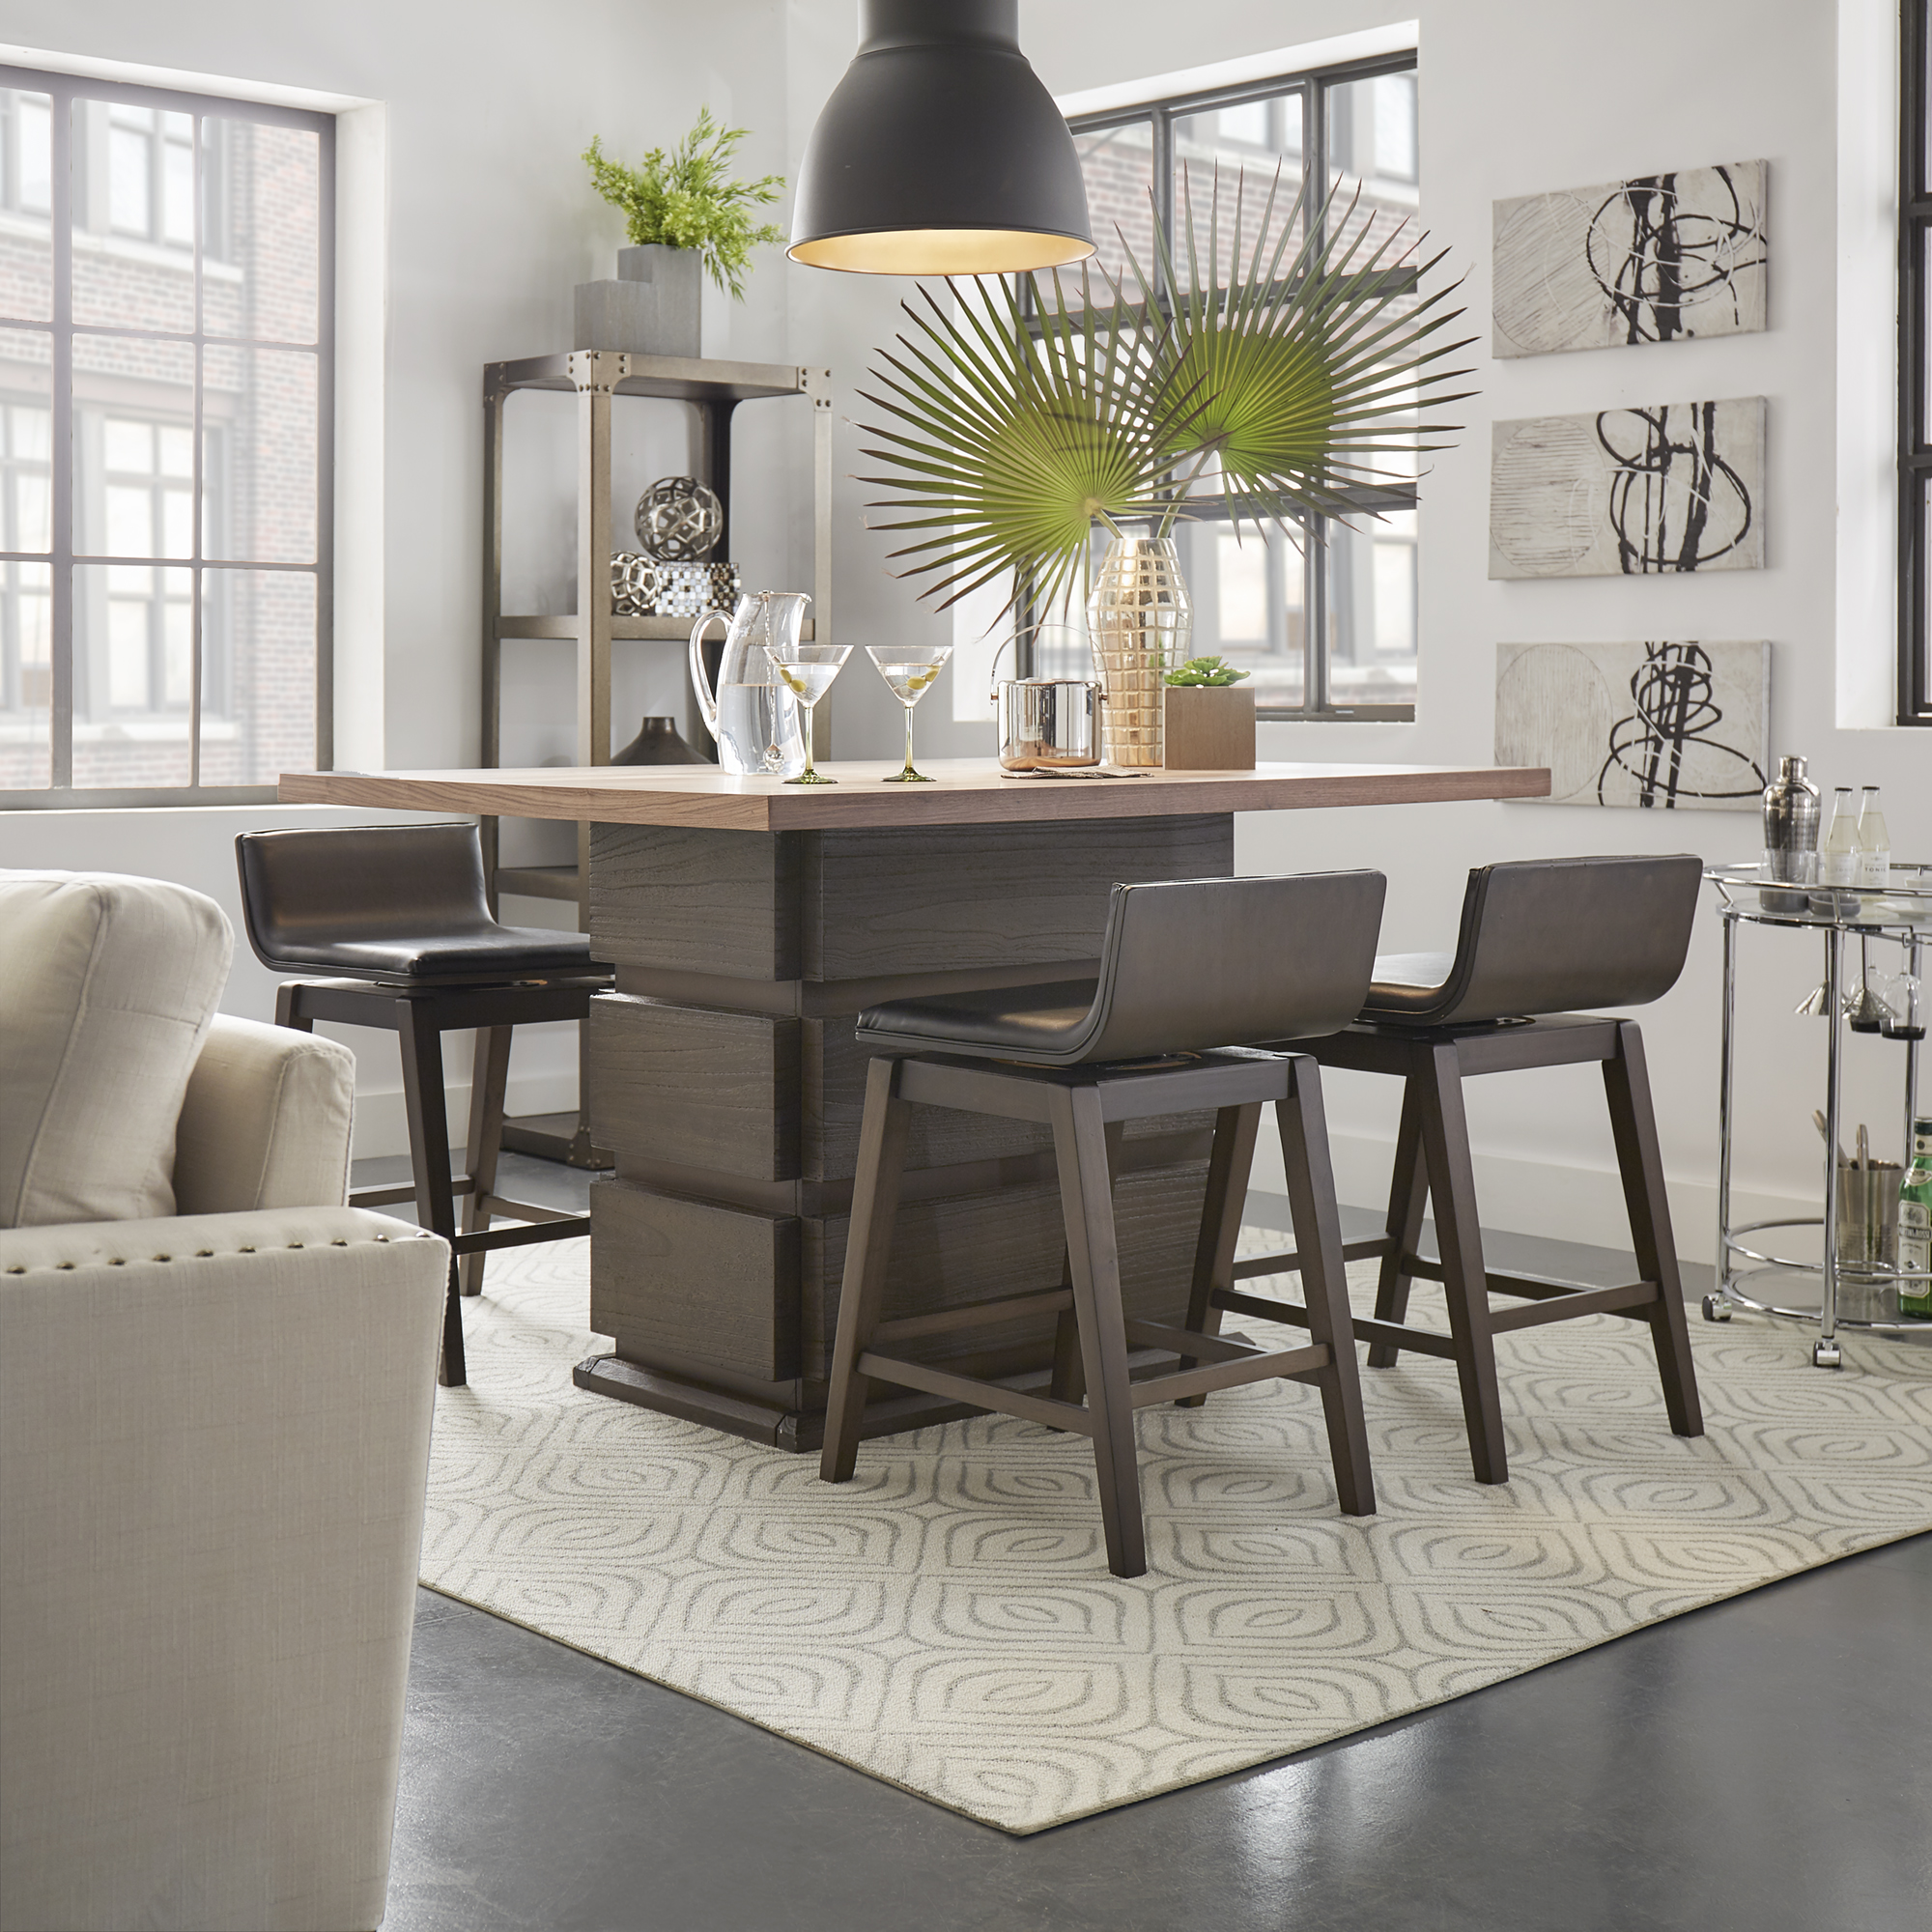 This one of our 10 inspiring dining combinations features a modern dining set. The dining table has a rectangular, dark brown pedestal base and a lighter brown wood table top. The four stools around the dining table have low backs and come in a dark brown finish that match the pedestal base. The table is decorated with gold and clear glassware.